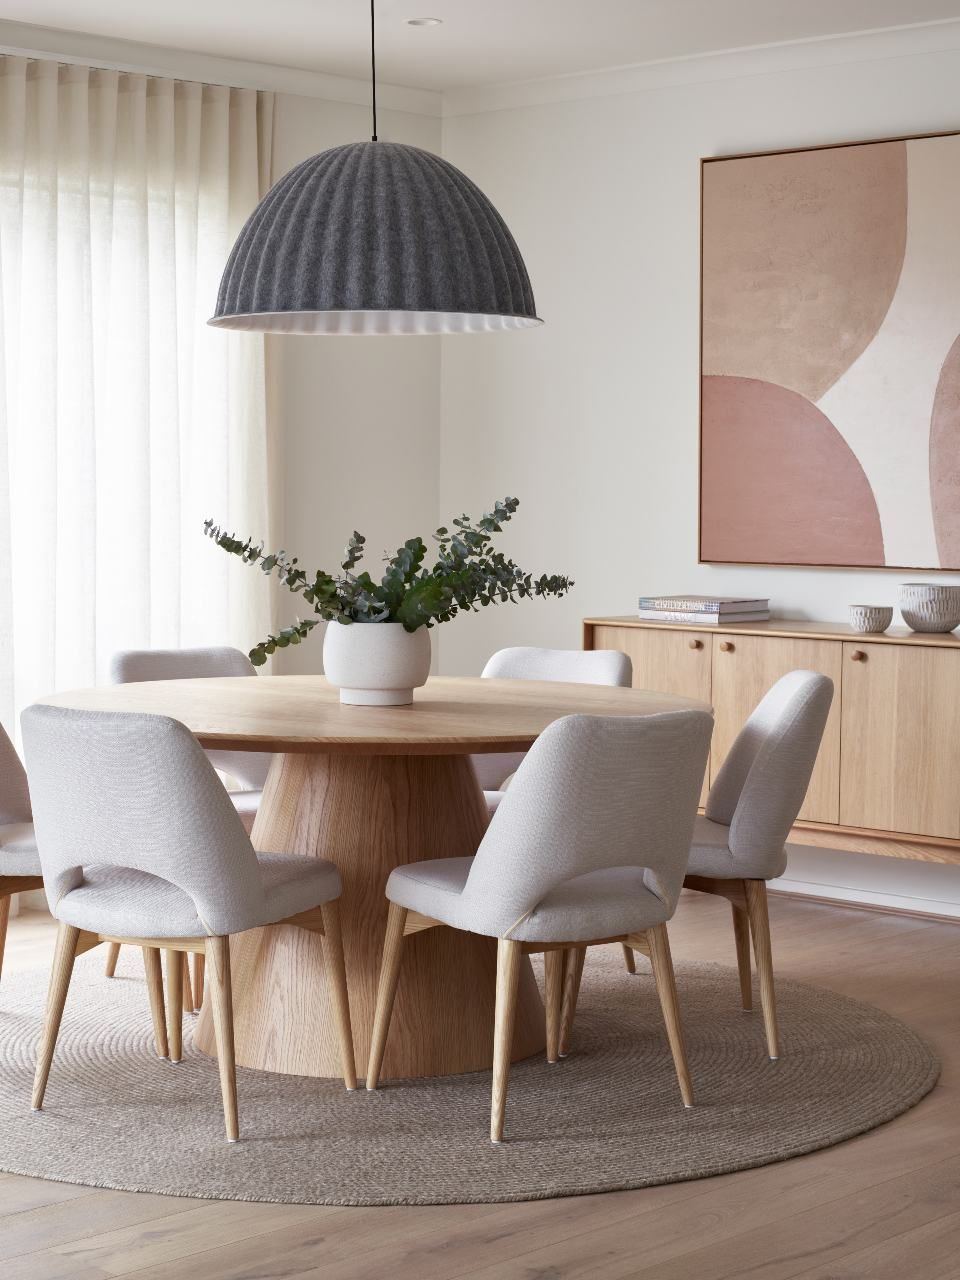 Embrace Elegance: The Timeless Appeal of Dining Rooms with Round Tables